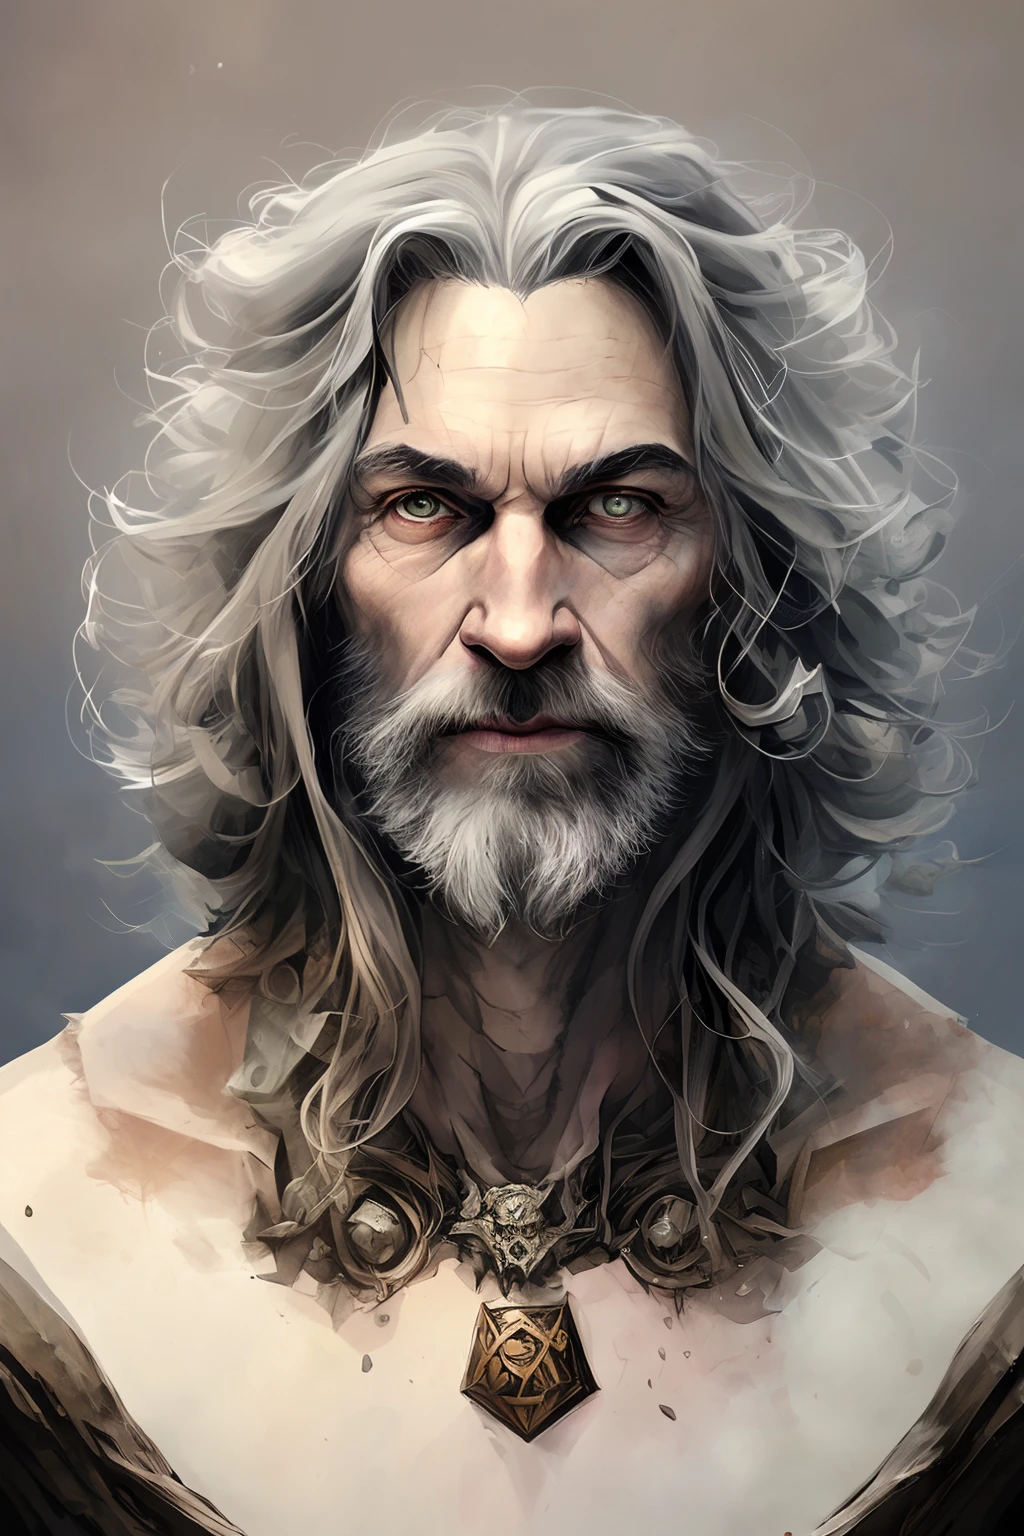 High Angle detailed ((dnd druid man portrait)), Continued , HD, (oil painting:1.1), (comic book art style:1.5),(inked outline:1.3), Stunning, Character, Portrait, (((Looking Sideways))), angular features, (dark grey Graduated Bob Hair), (muted natural colors:1.3) in painterly style by Jean Baptiste Monge